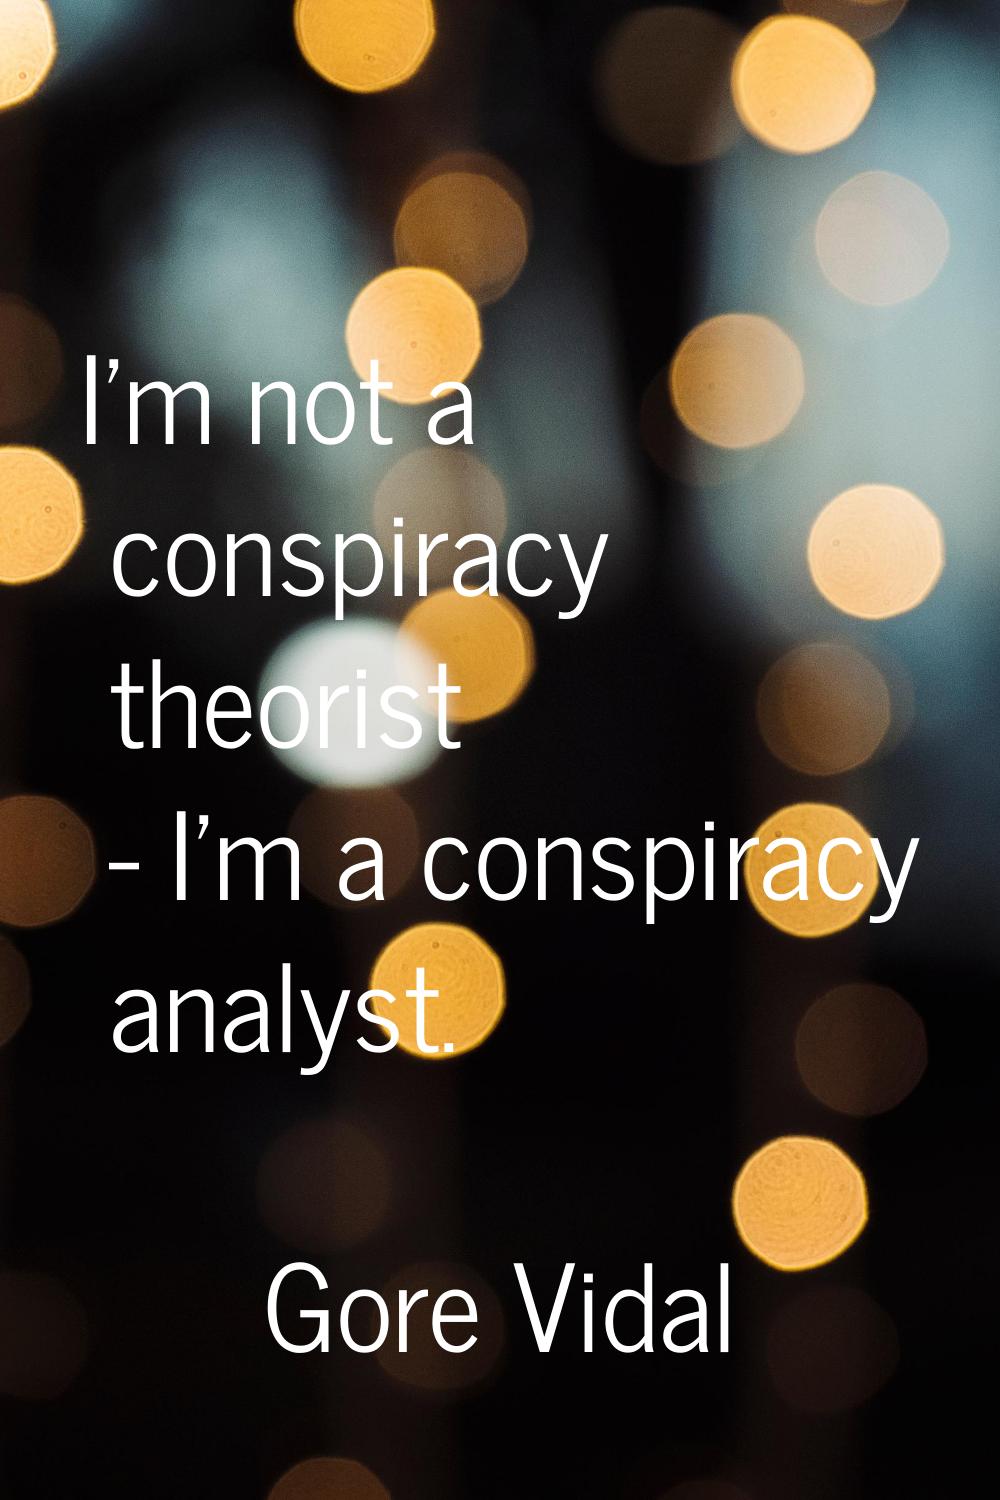 I'm not a conspiracy theorist - I'm a conspiracy analyst.